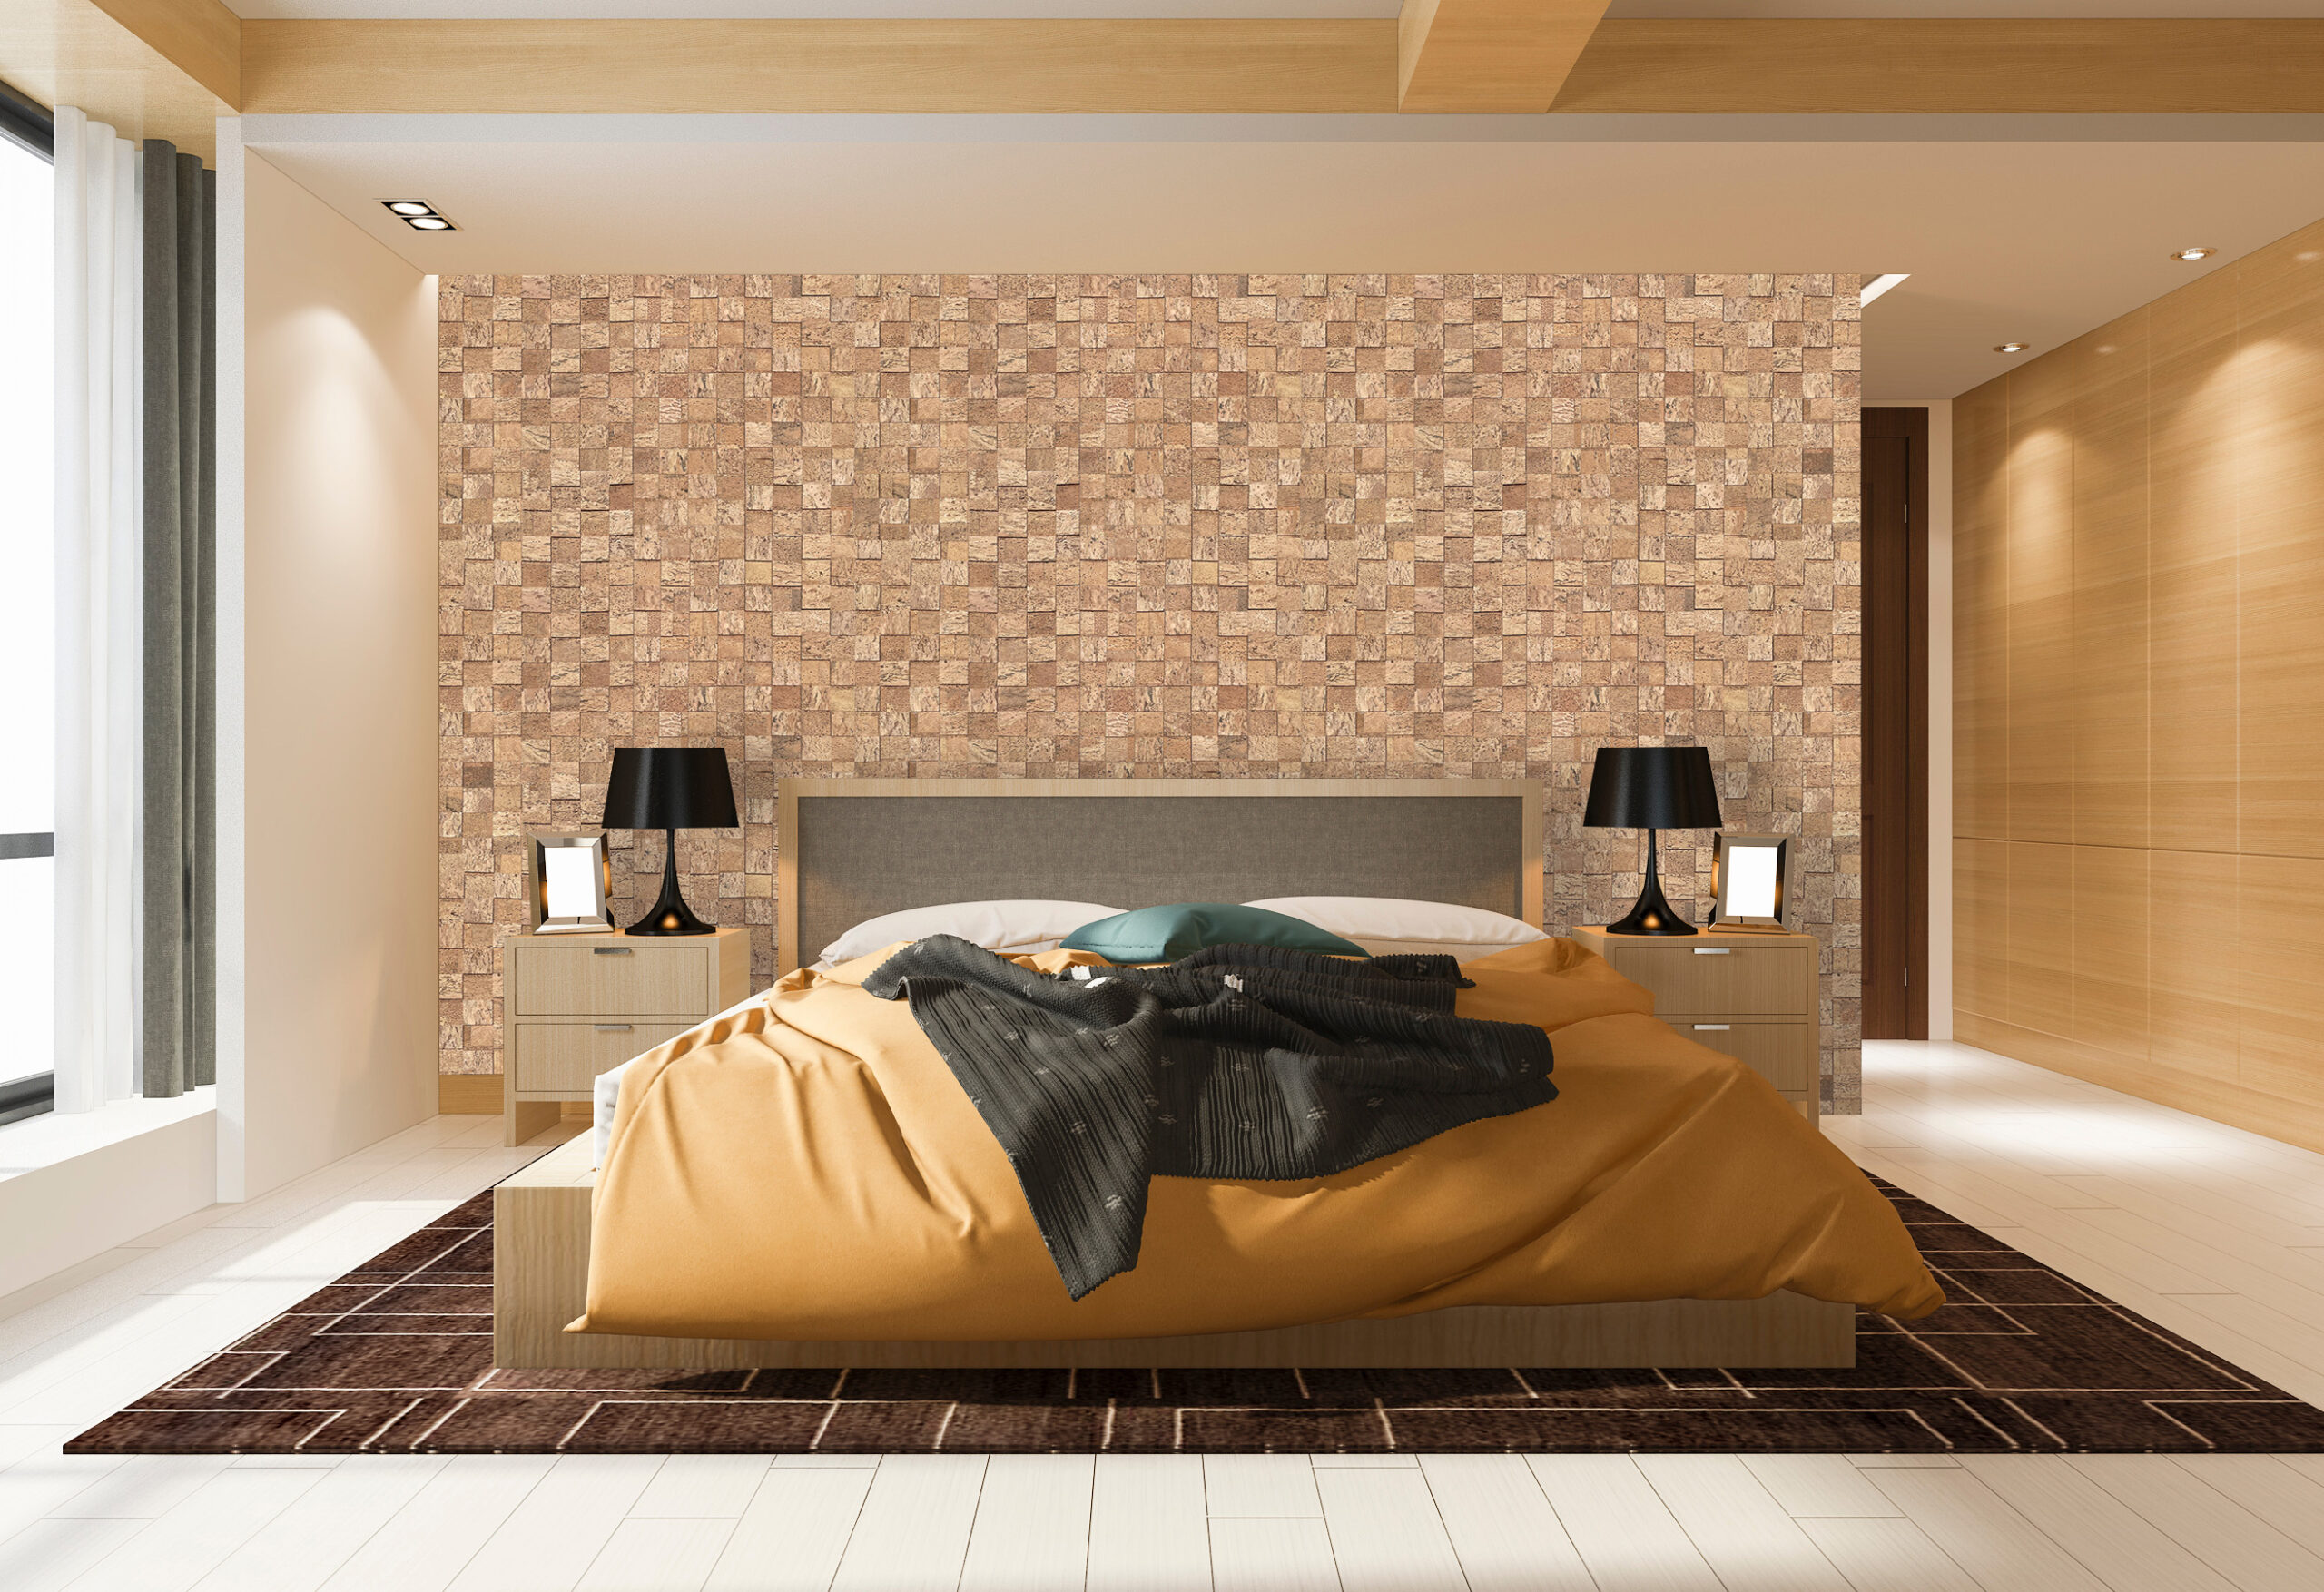 USA's Best Cork Flooring, Wall Tiles, Underlayment And More